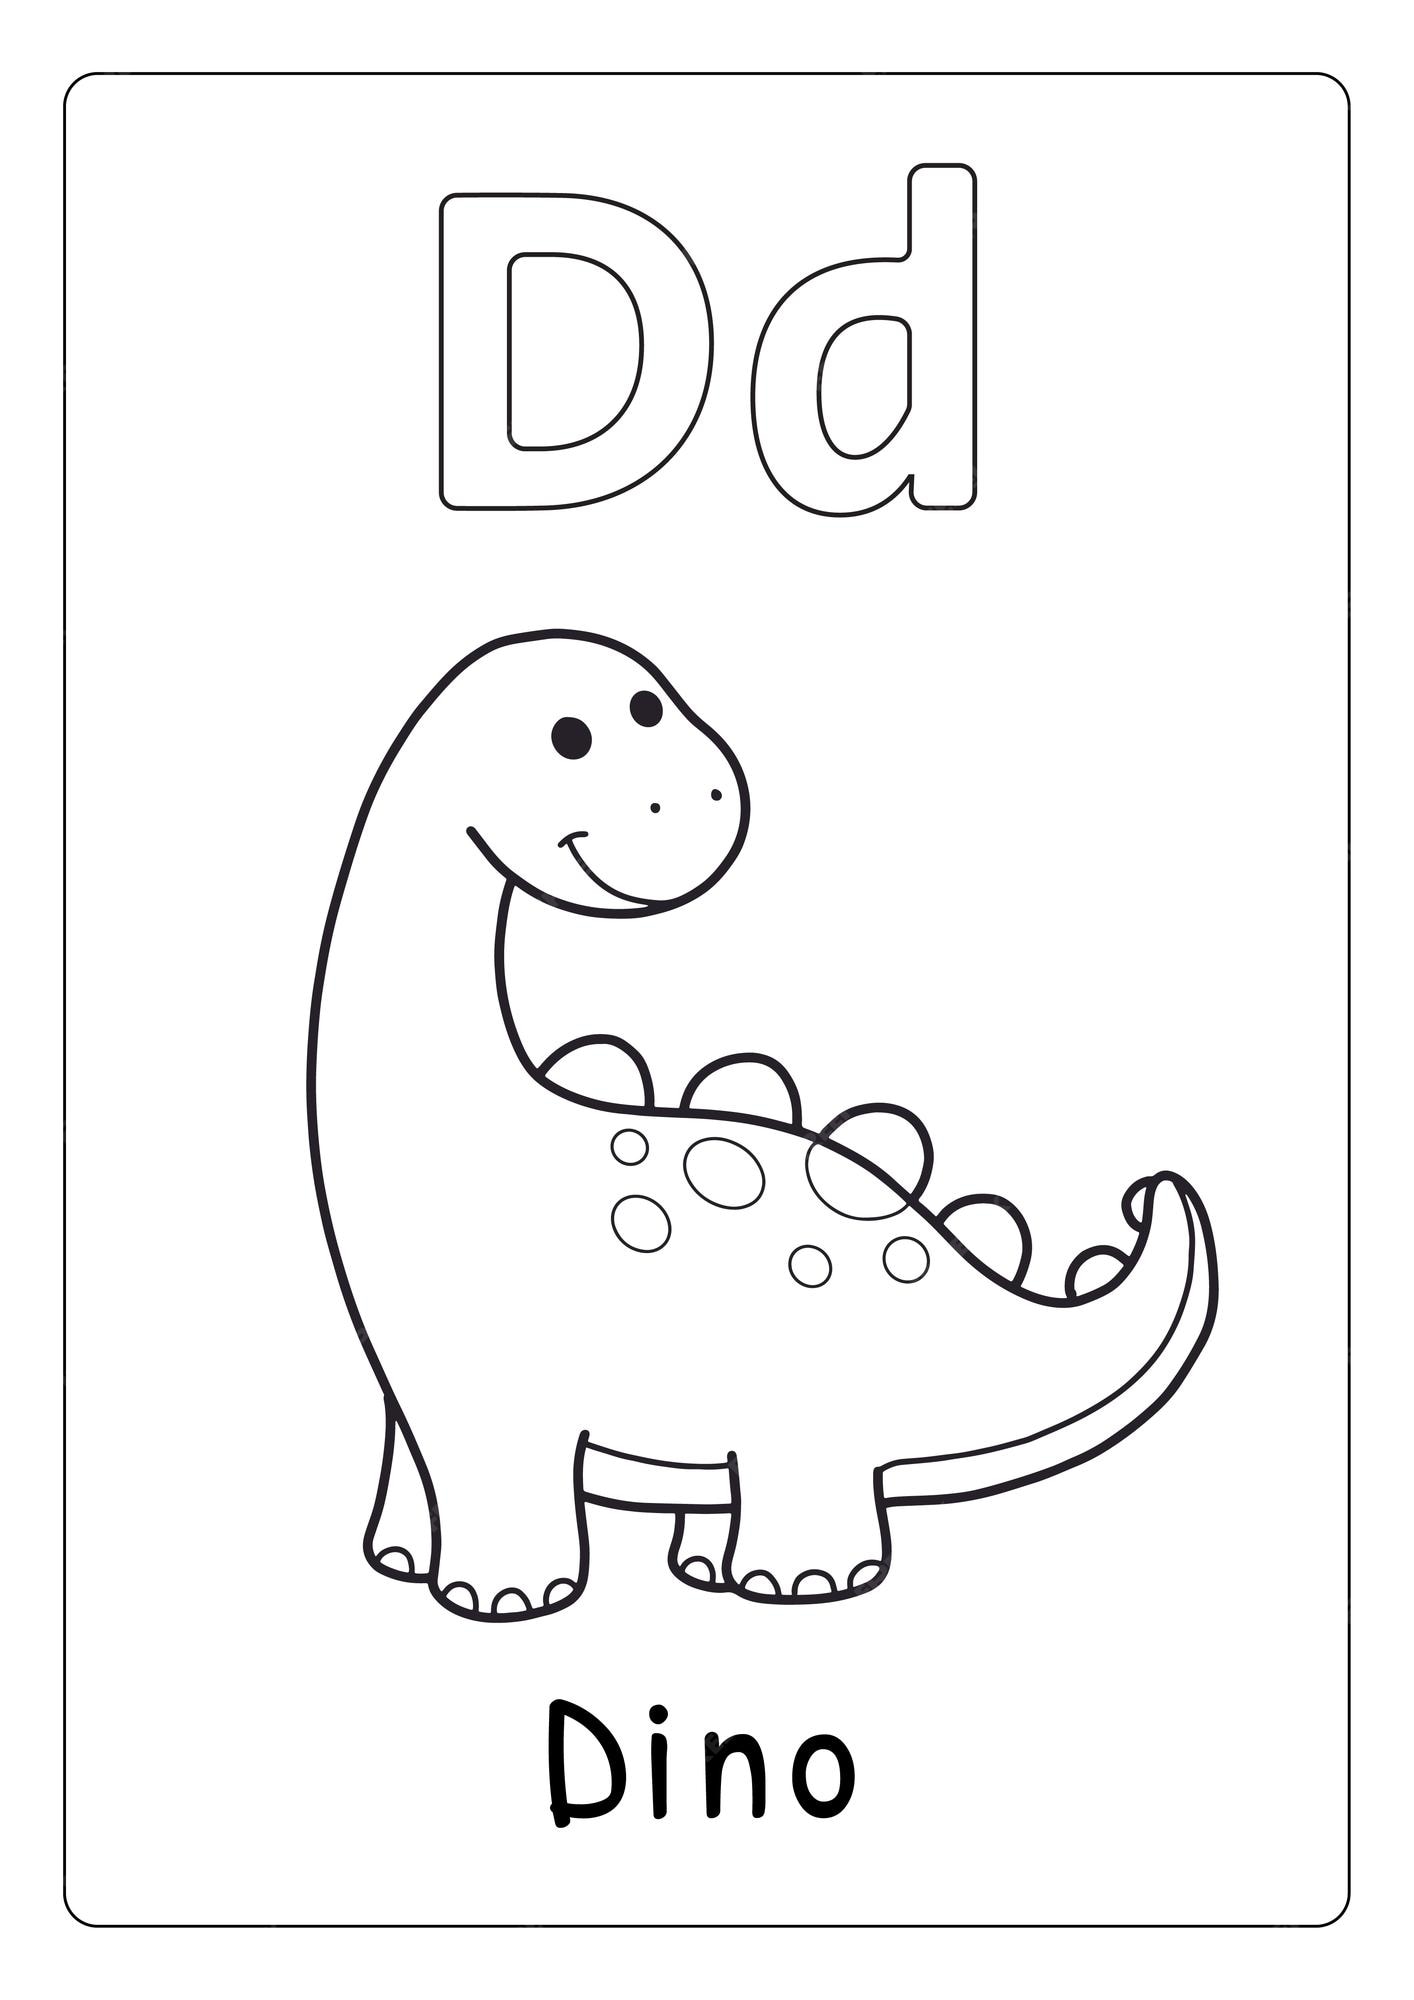 Premium vector alphabet letter d for dino page for kids